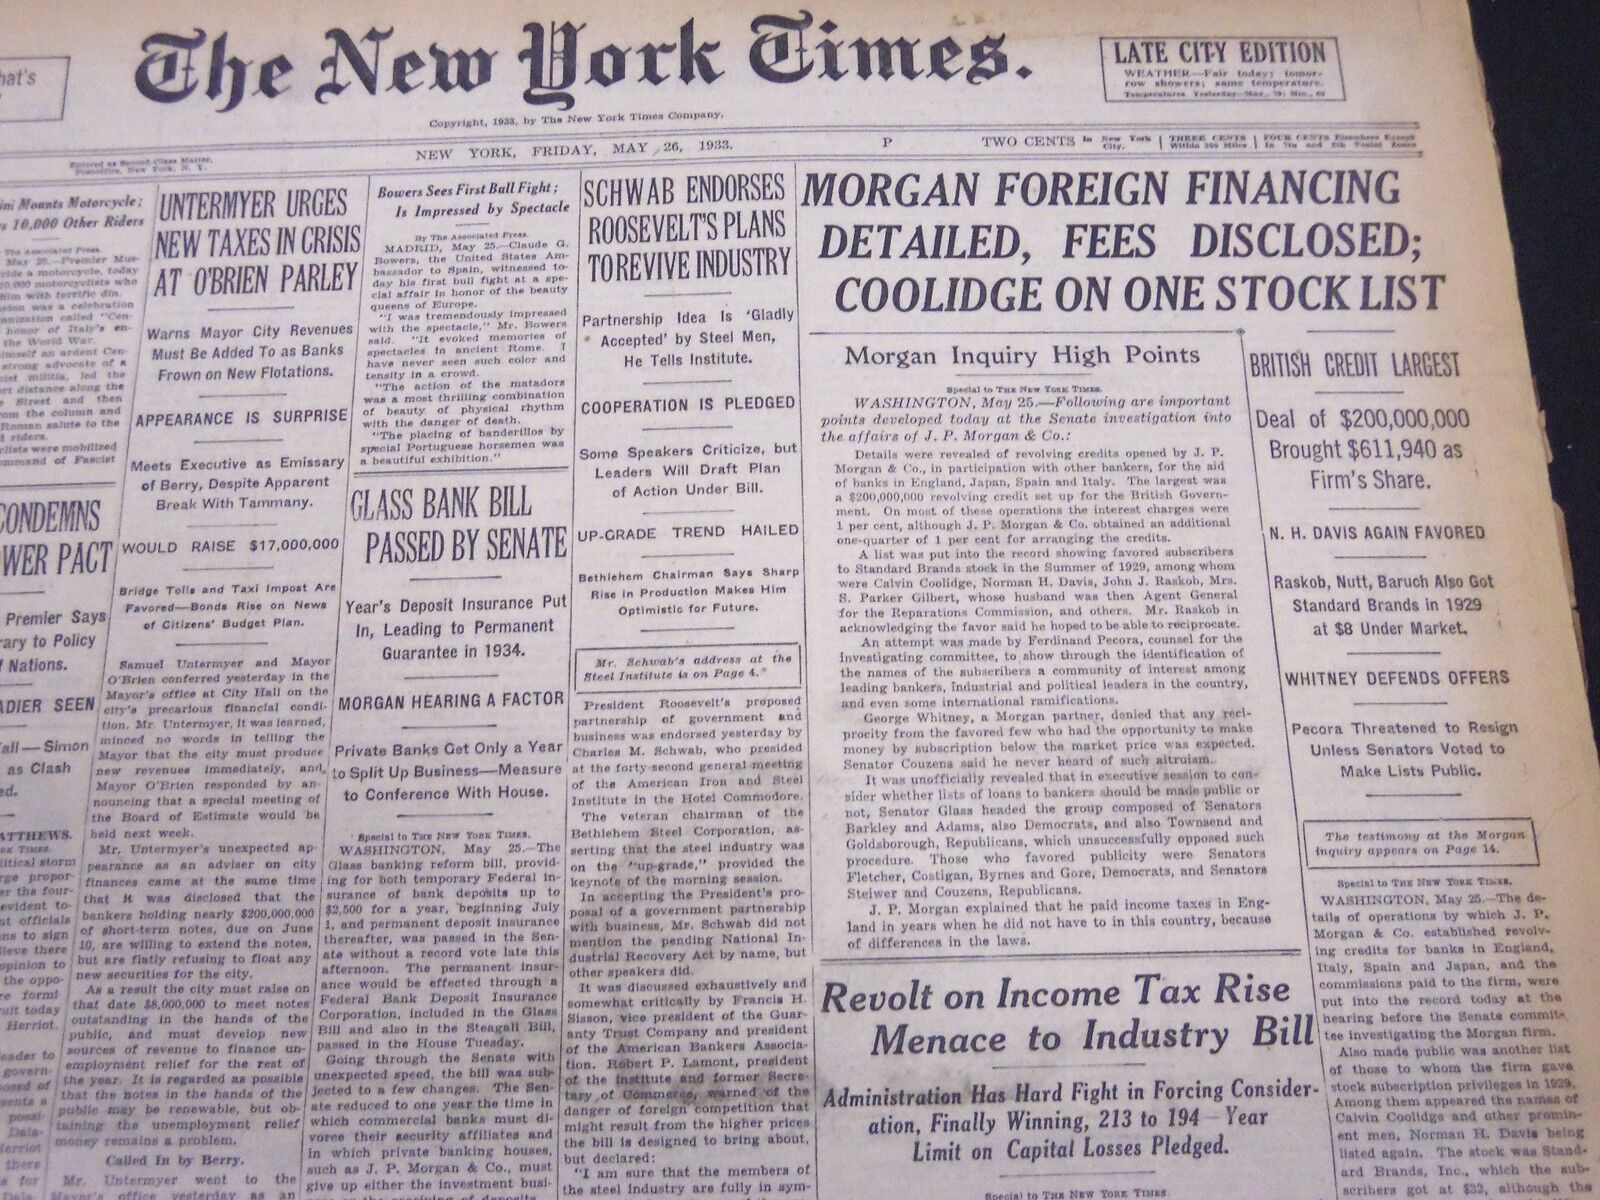 1933 MAY 26 NEW YORK TIMES - MORGAN FOREIGN FINANCING DETAILED - NT 5253